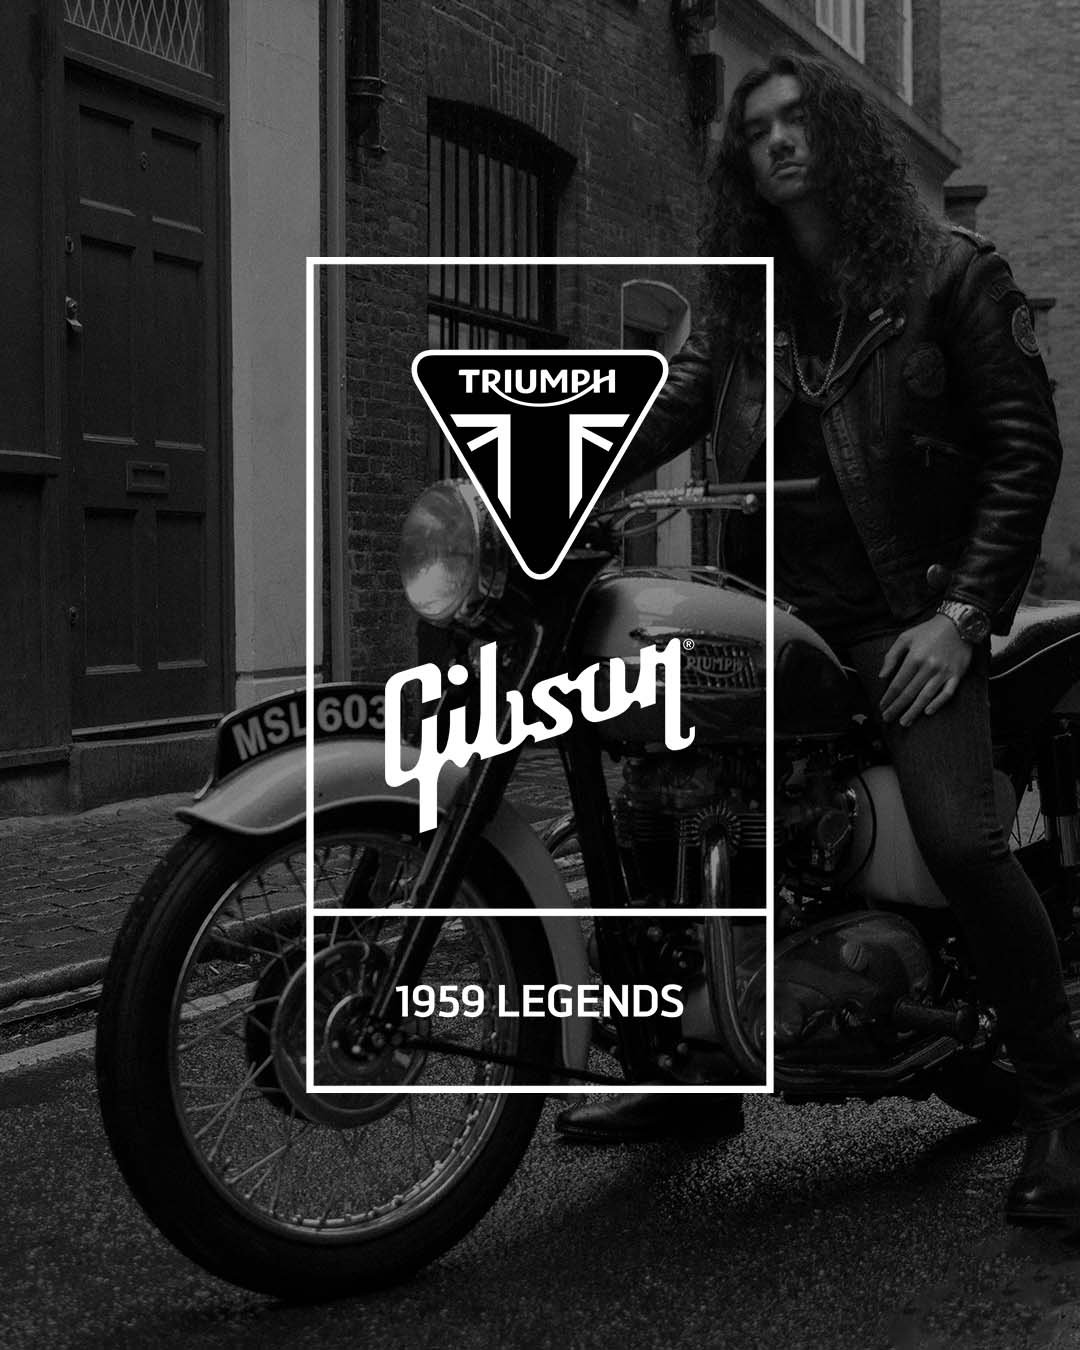 A view of Gibson guitars and triumph adverts in anticipation of an upcoming partnership with Gibson